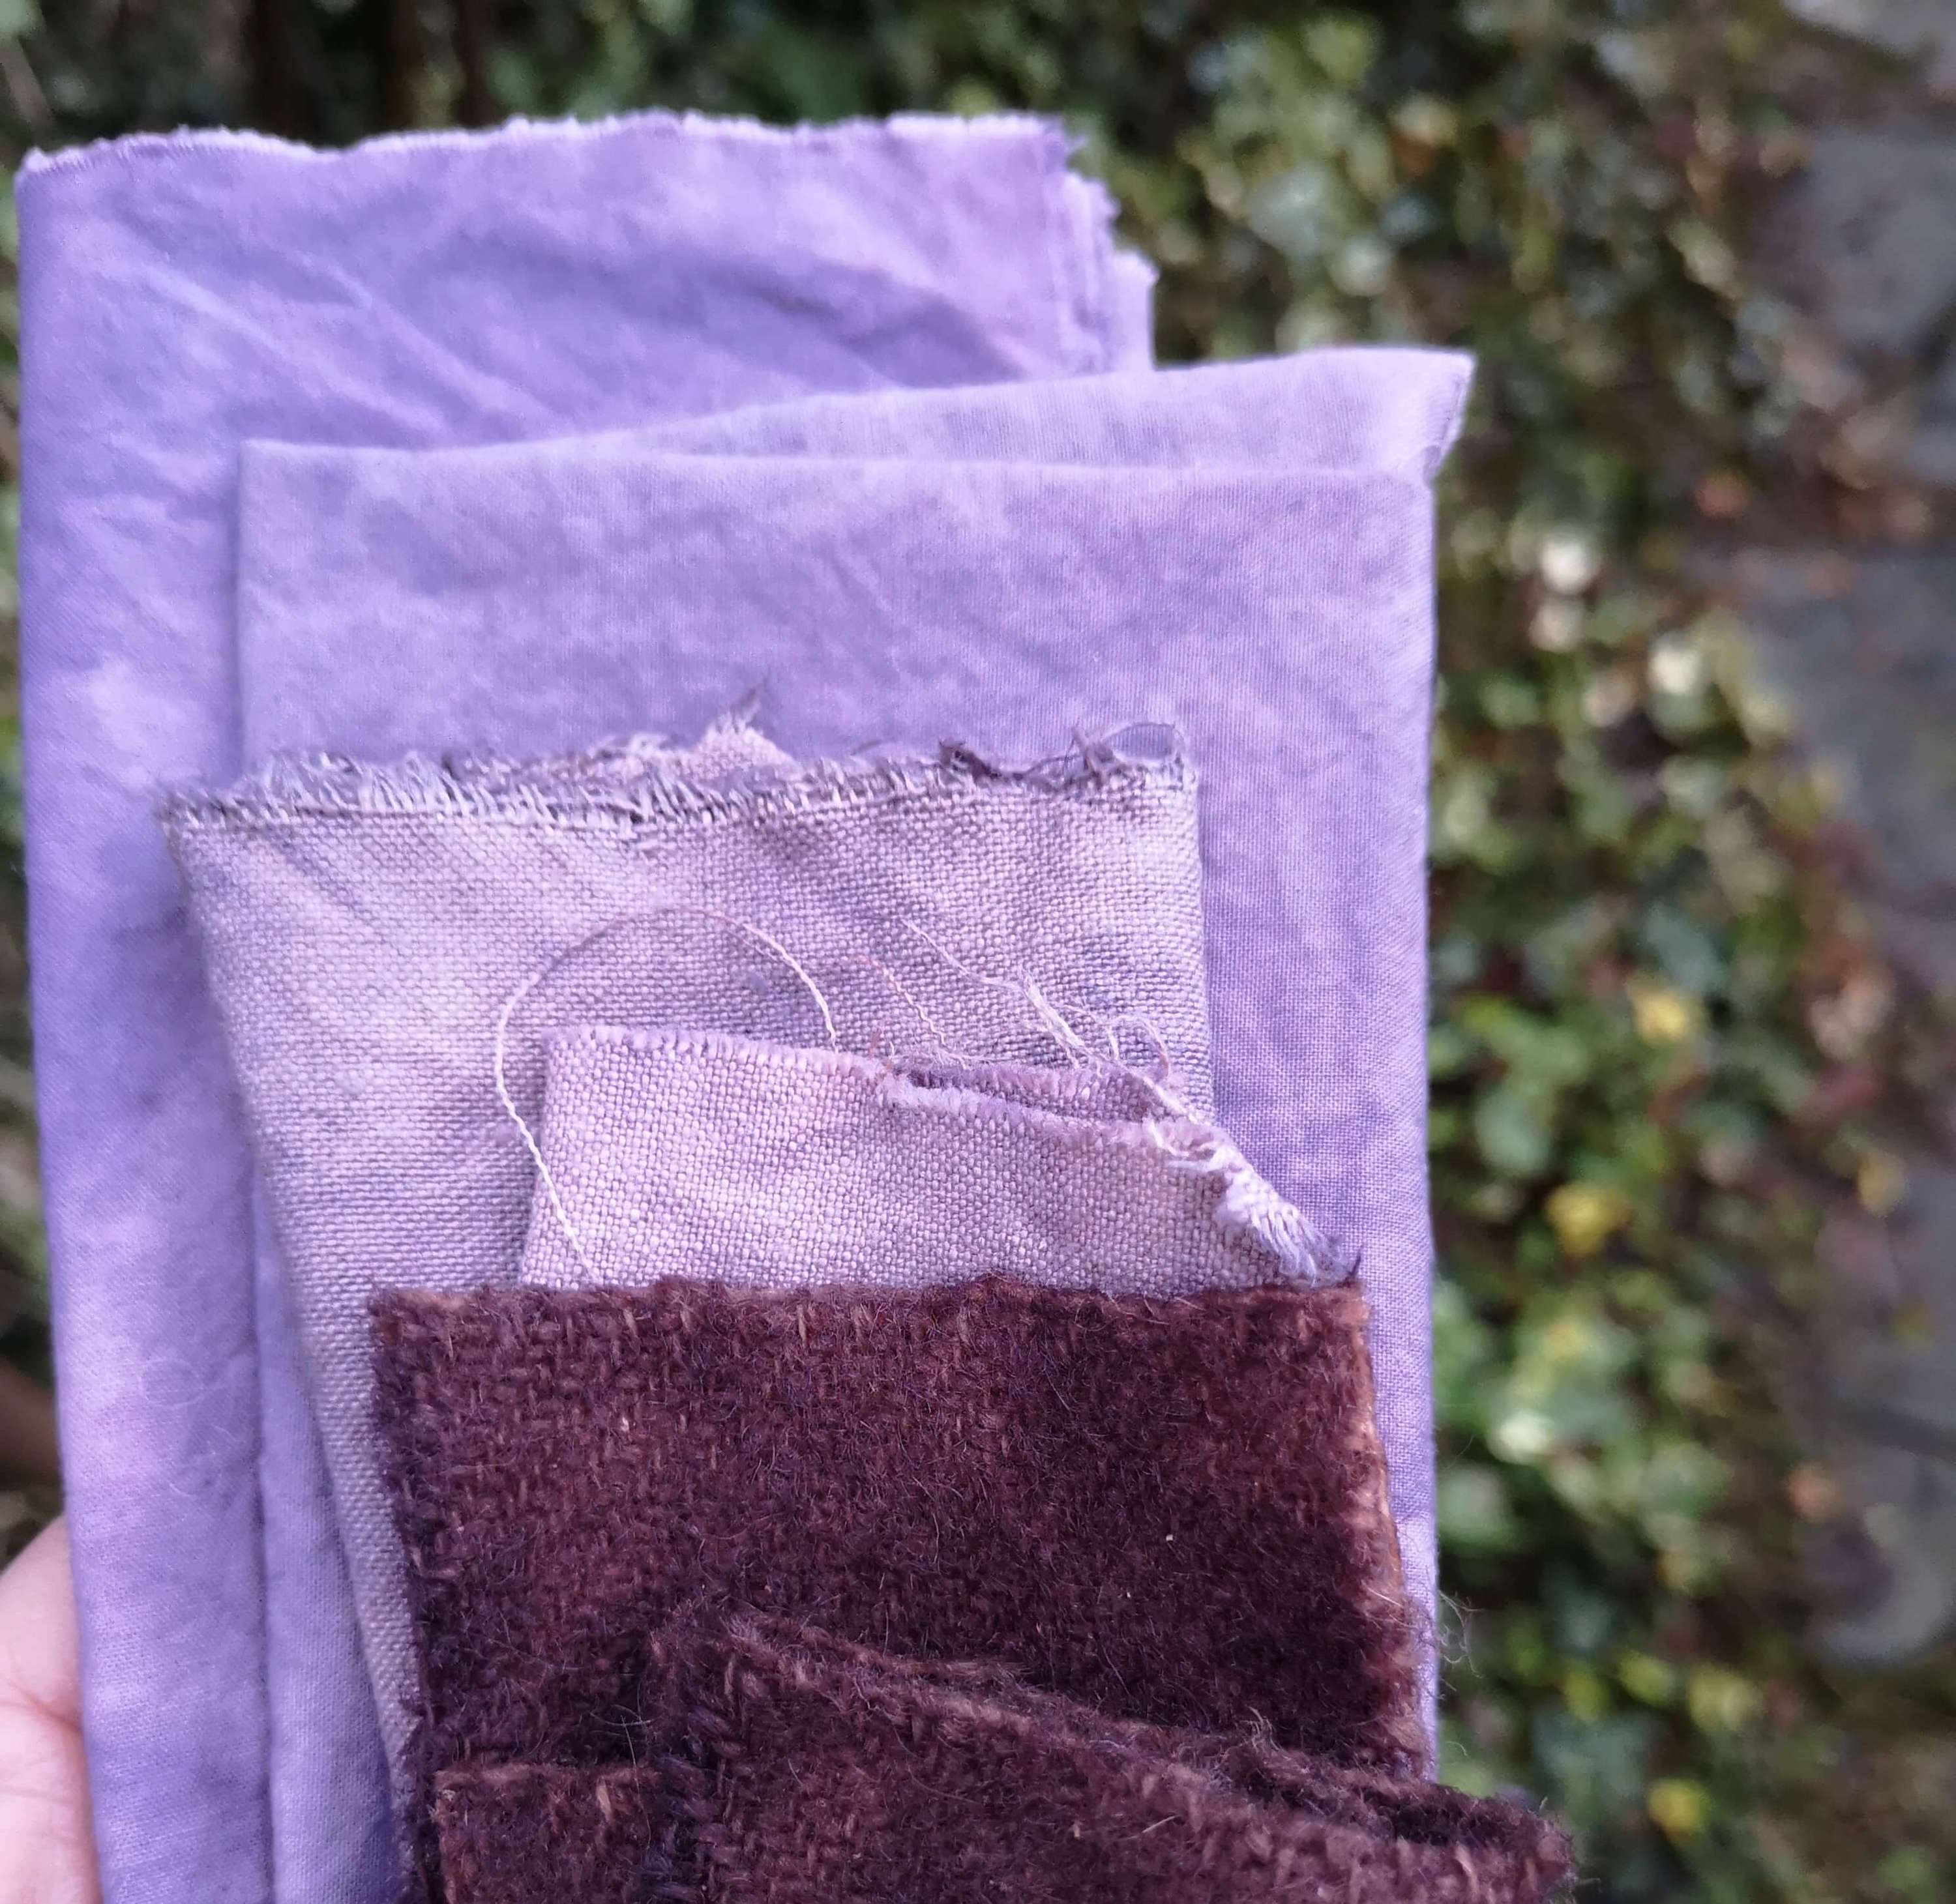 How to Madder Dyeing, Purples and Mauves? – themazi